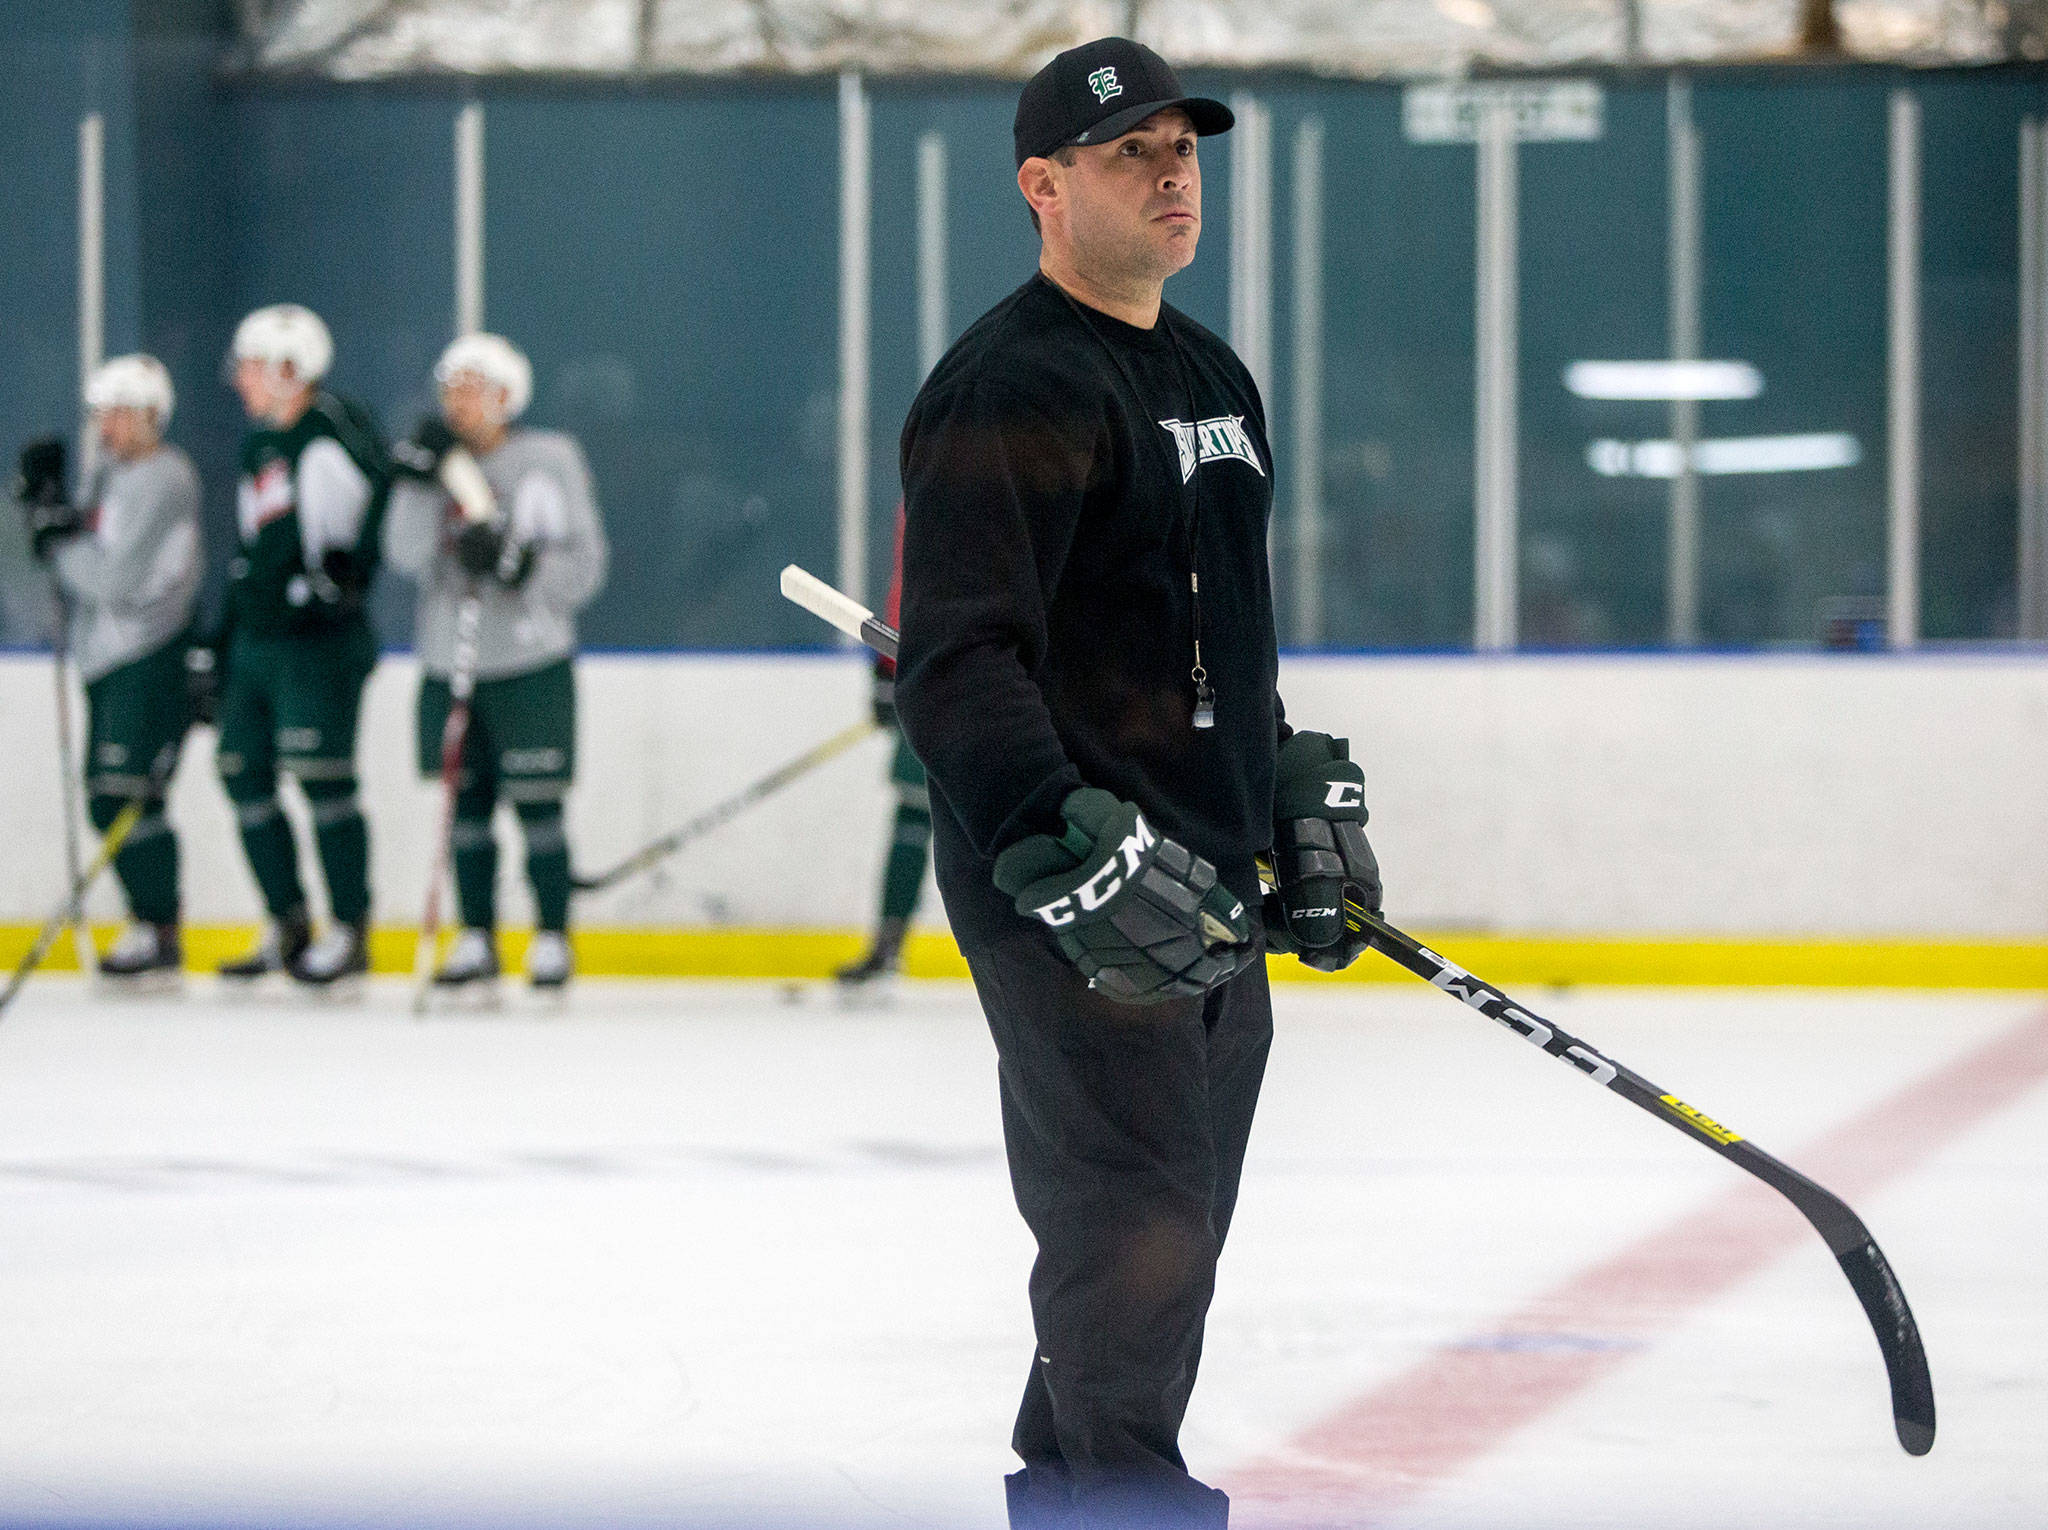 Silvertips head coach Dennis Williams during practice on Sept. 12 at Angel of the Winds Arena in Everett. (Olivia Vanni / The Herald)